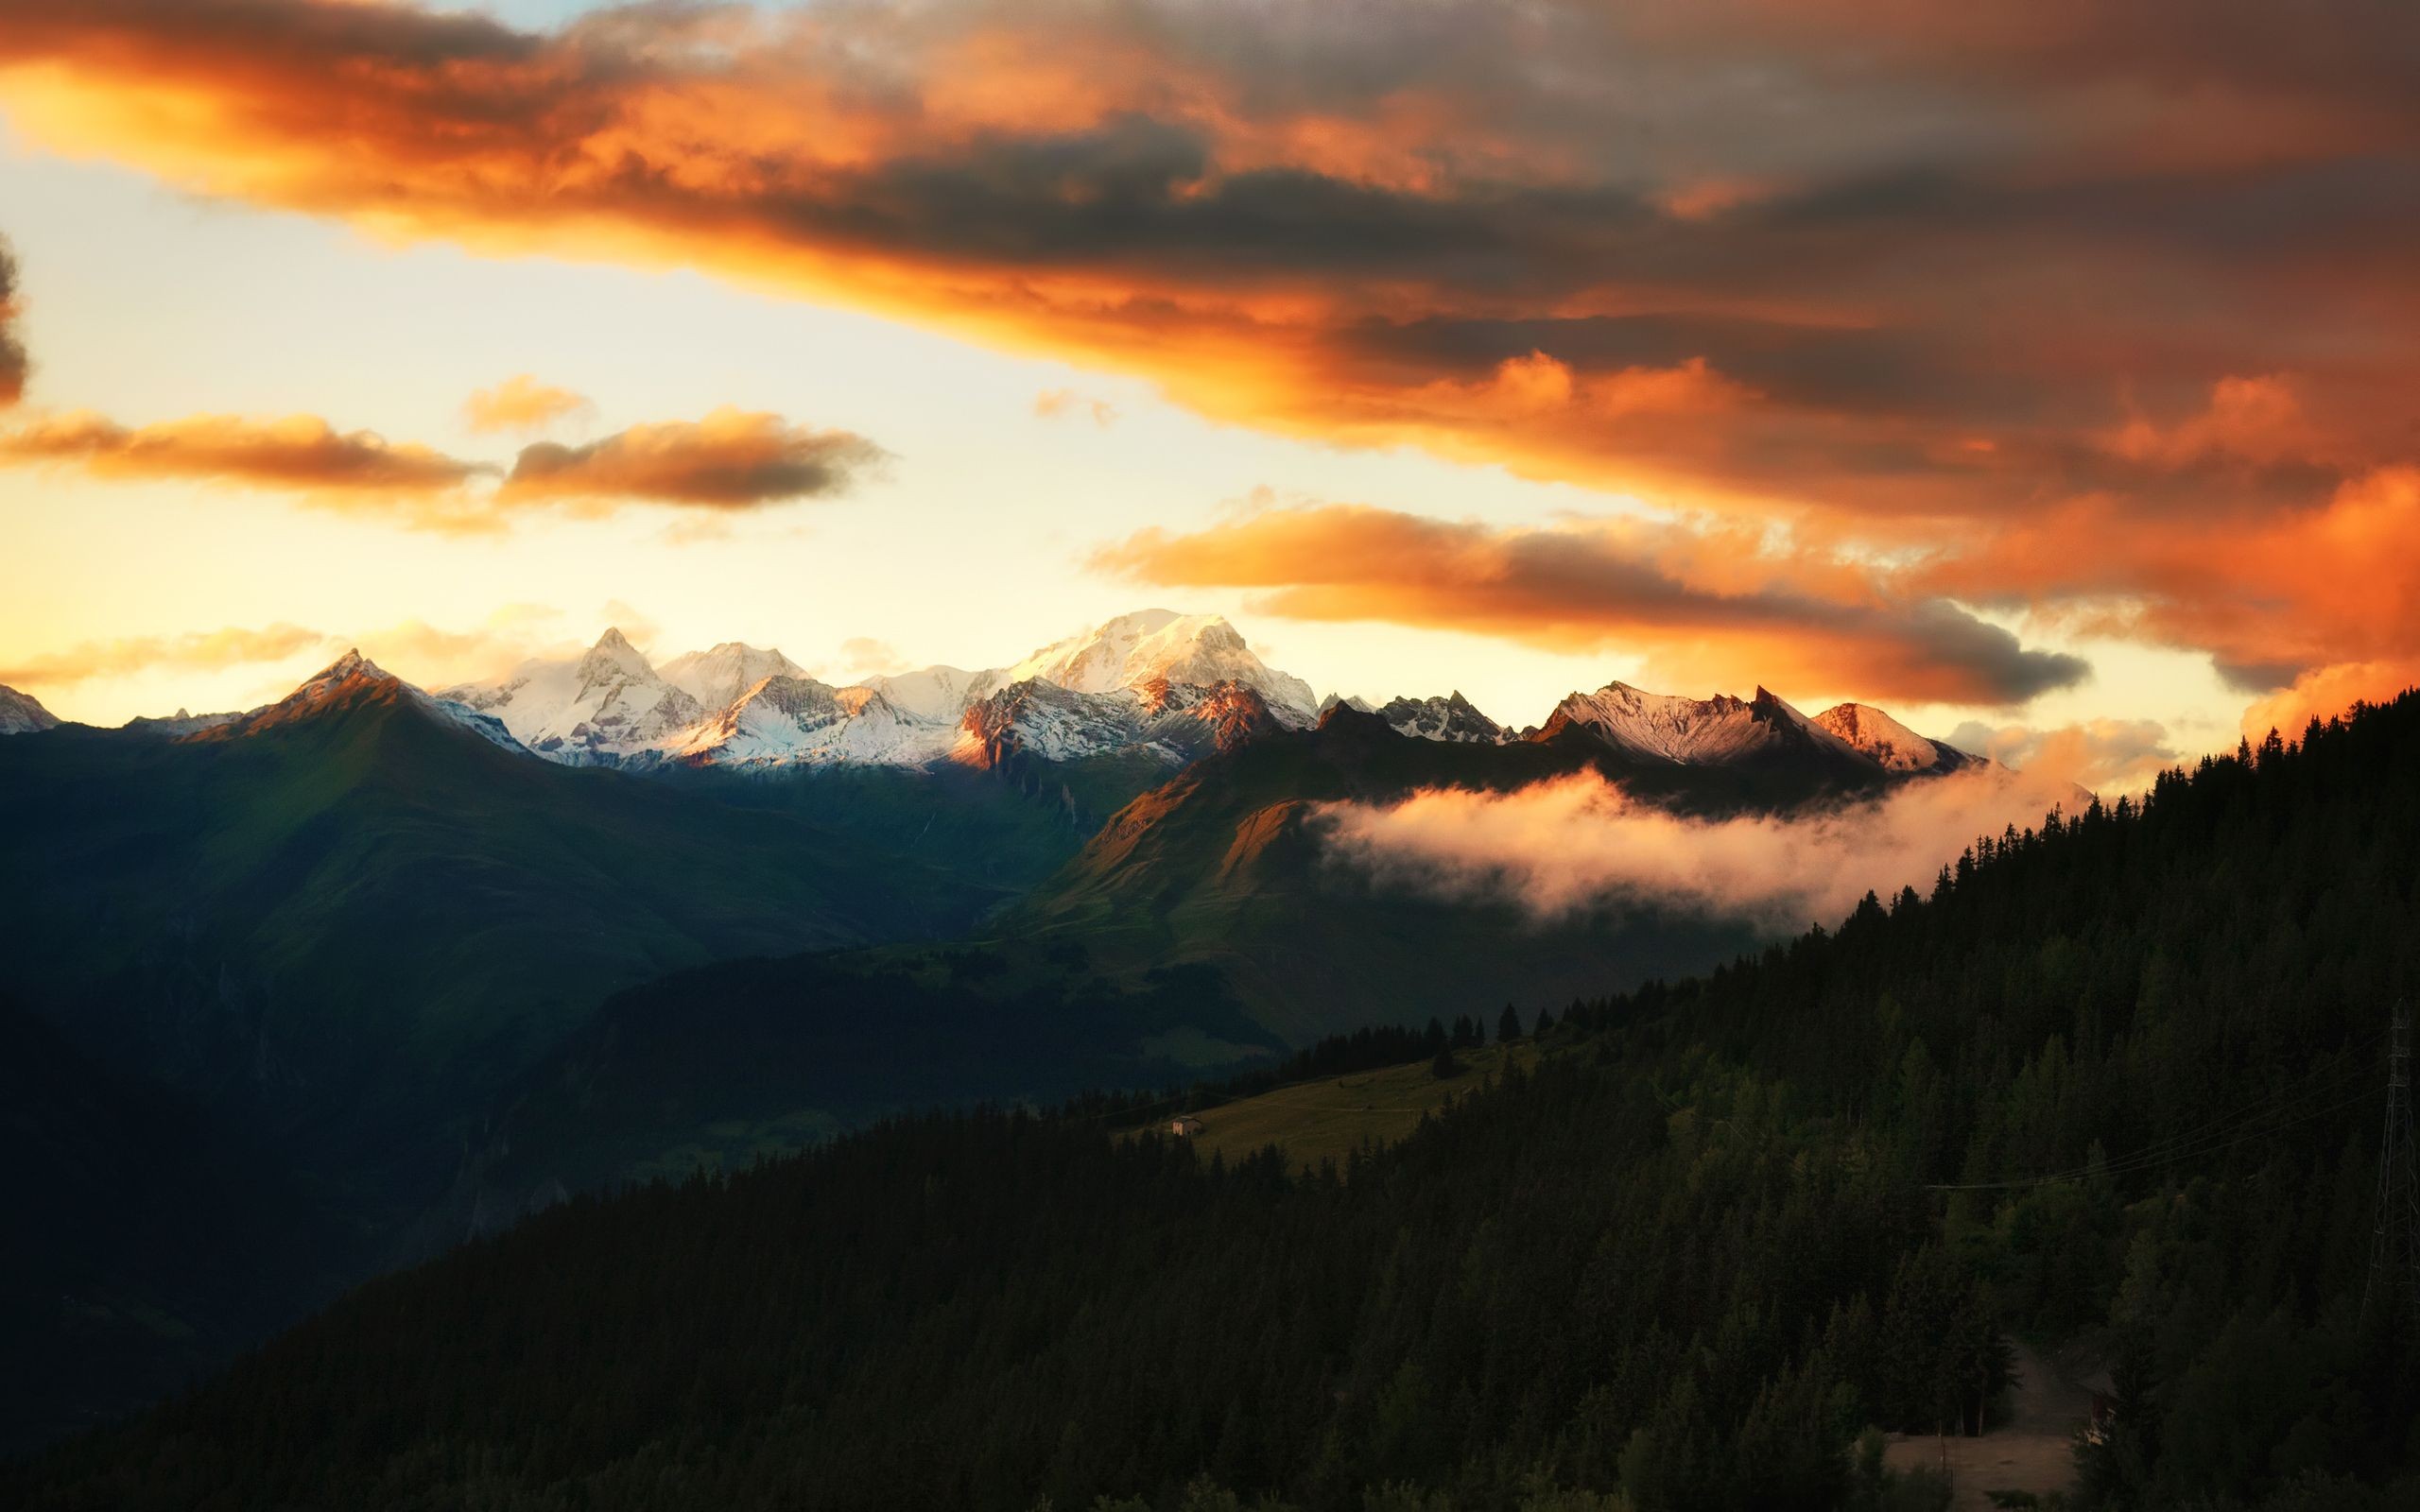 General 2560x1600 nature landscape mountains clouds trees forest sunset sky orange sky snowy peak